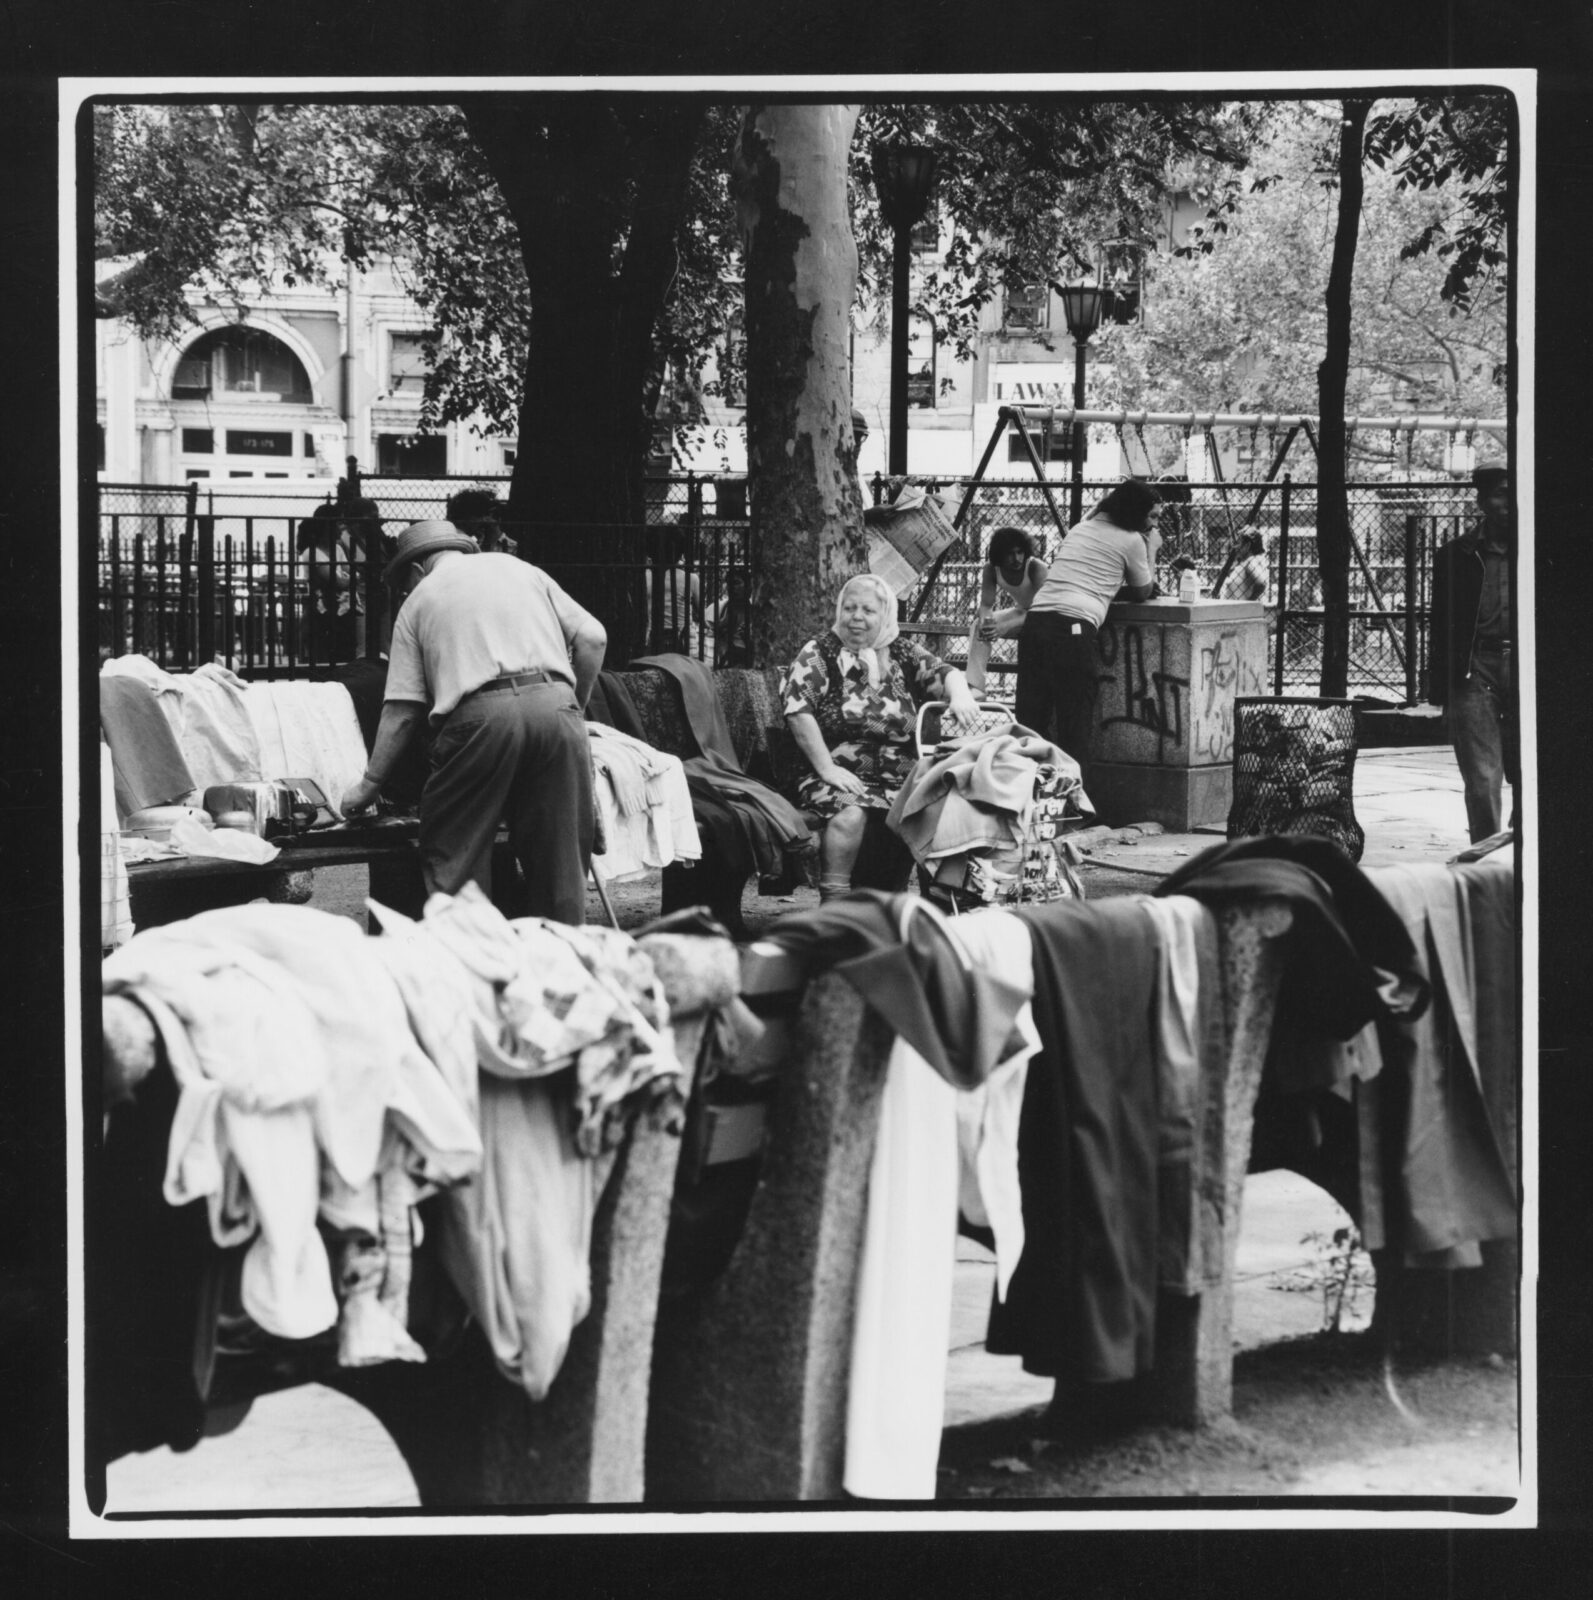 Black and white photo of clothing being sold on benches in Seward Park. An older woman watches a man browse clothing while children swing on a playground in the background.